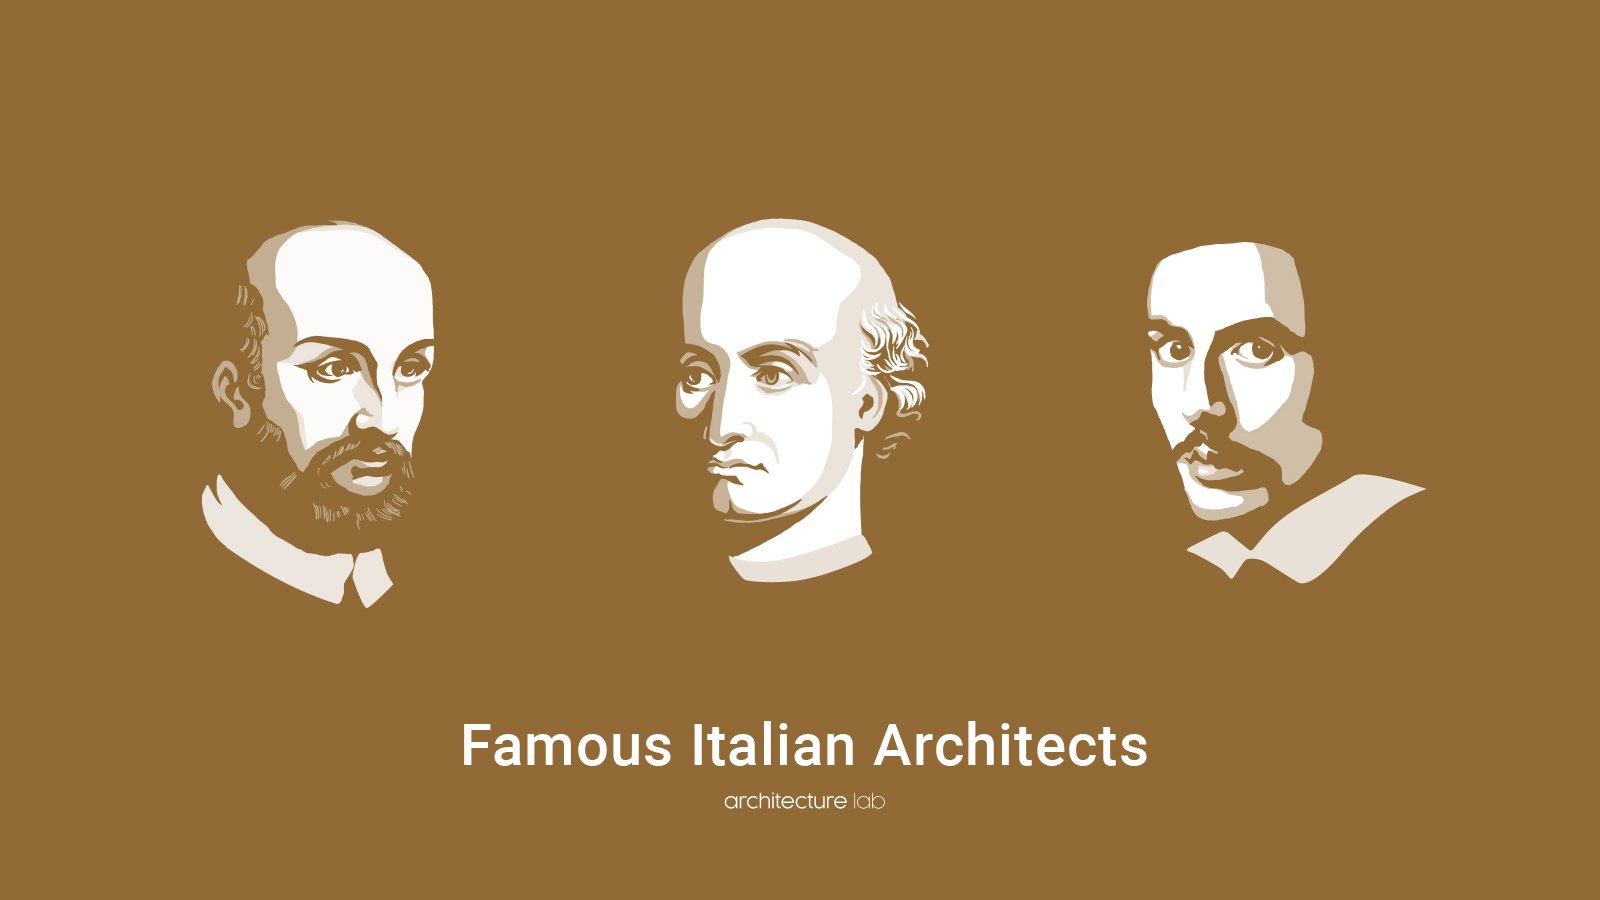 15 famous italian architects and their proud works